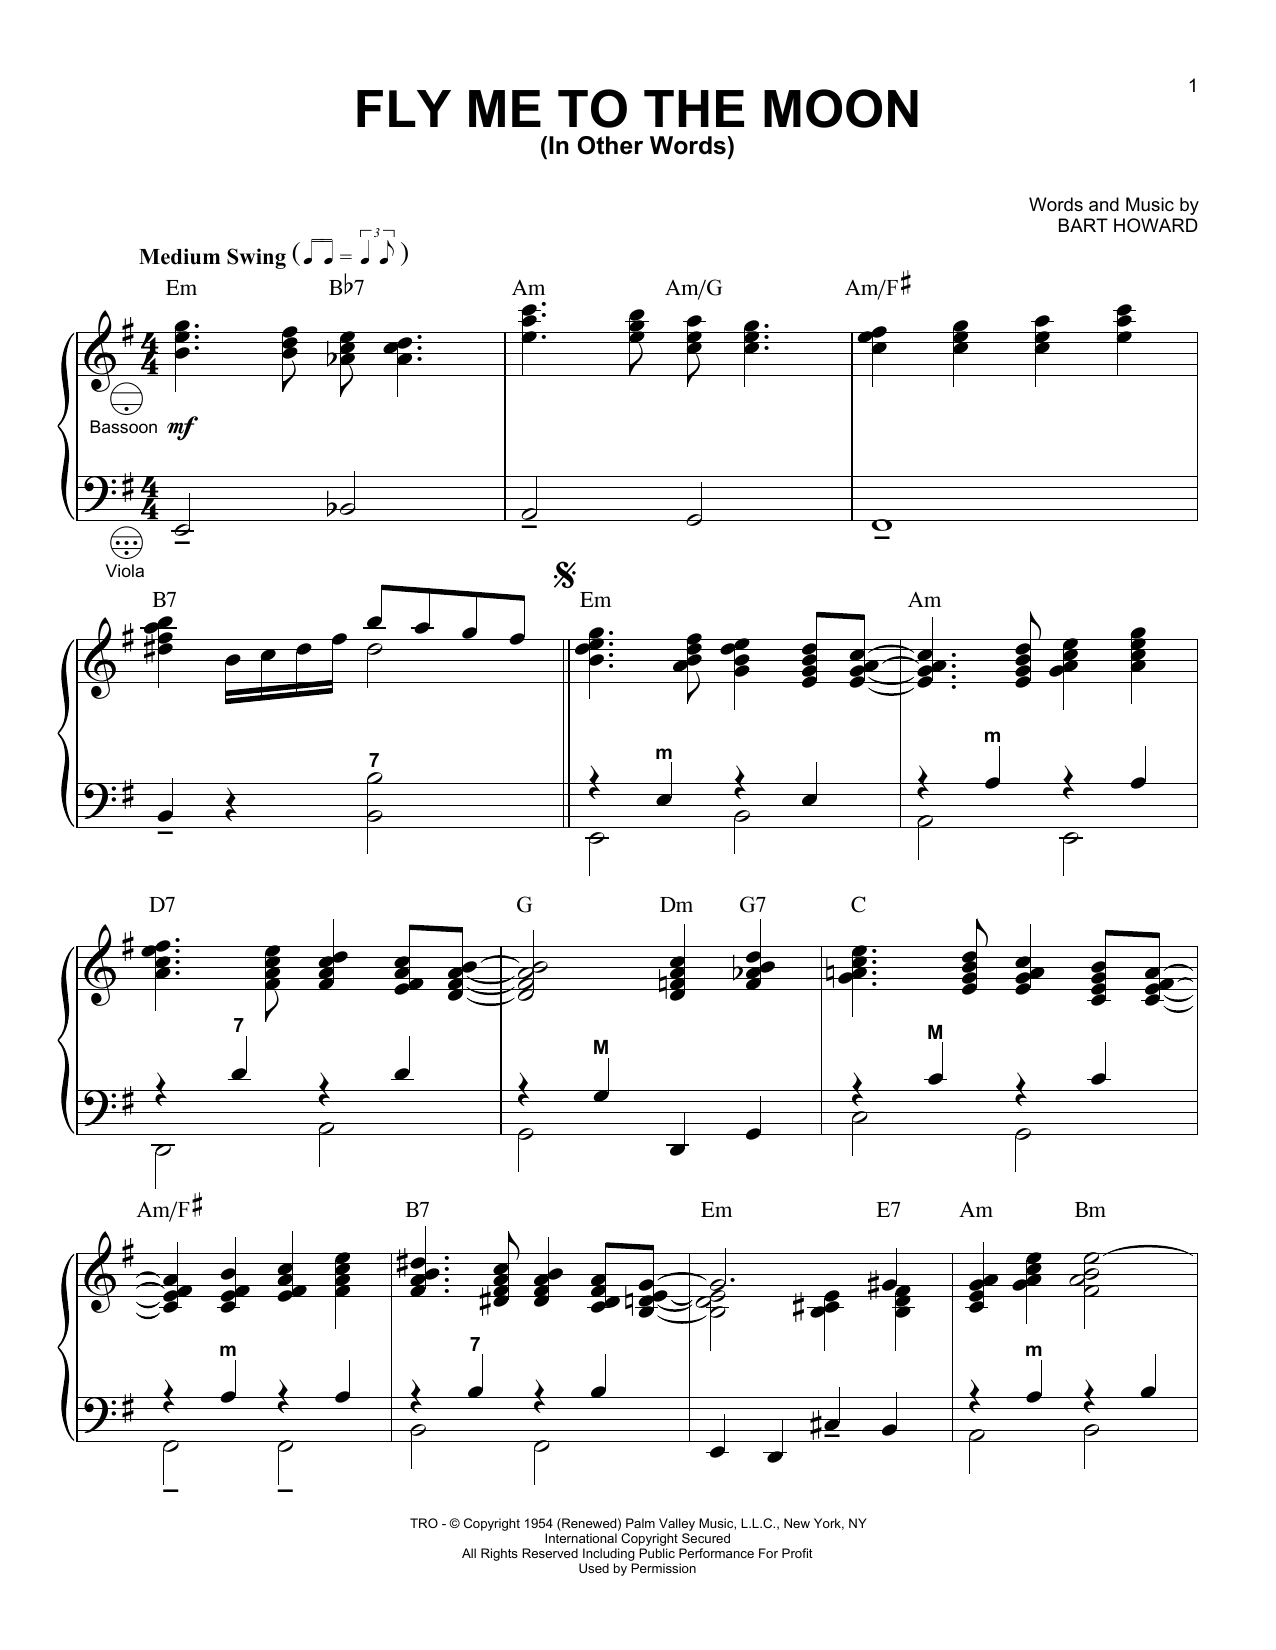 Download Bart Howard Fly Me To The Moon (In Other Words) (ar Sheet Music